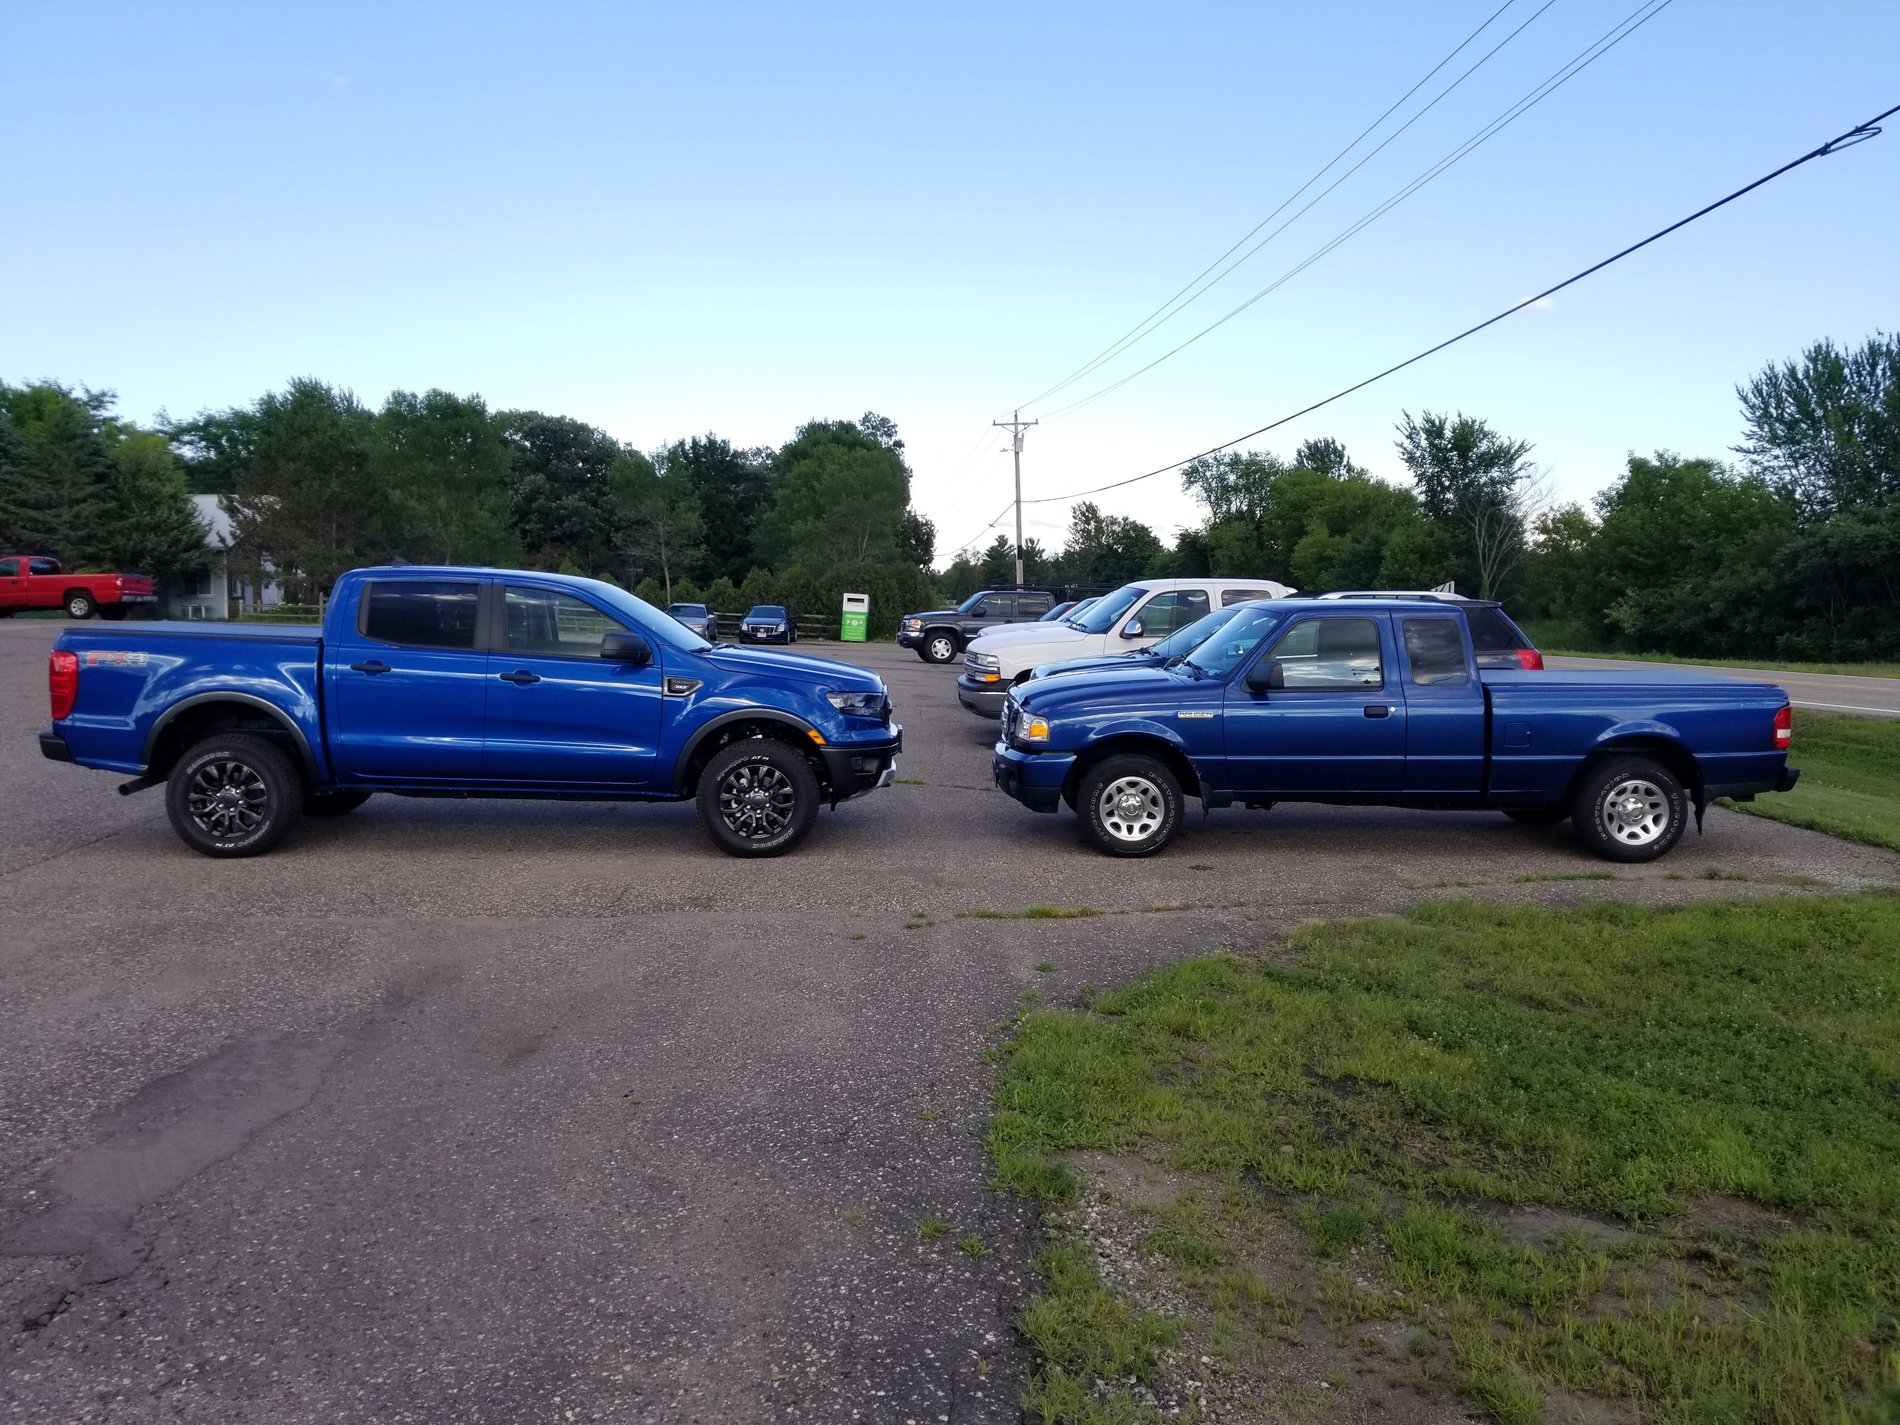 Ford Ranger Look at my Ranger parked next to stuff 20190717_183458